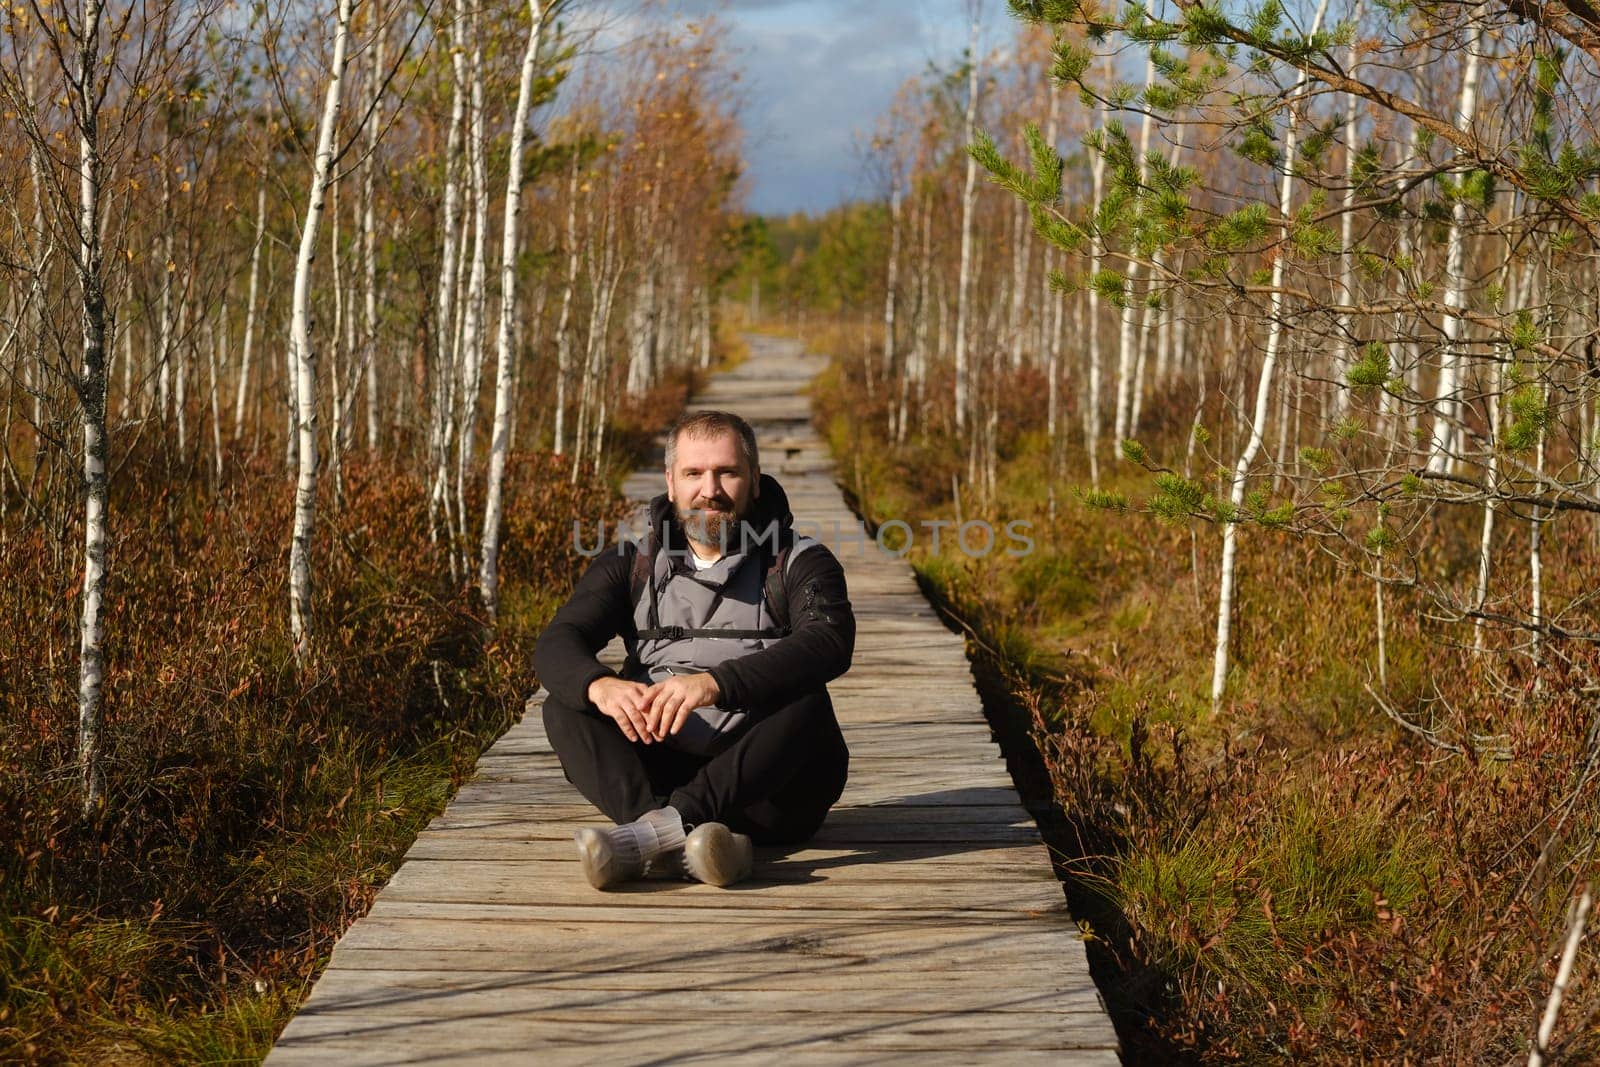 A man sits on a wooden path in a swamp in Yelnya, Belarus by Lobachad